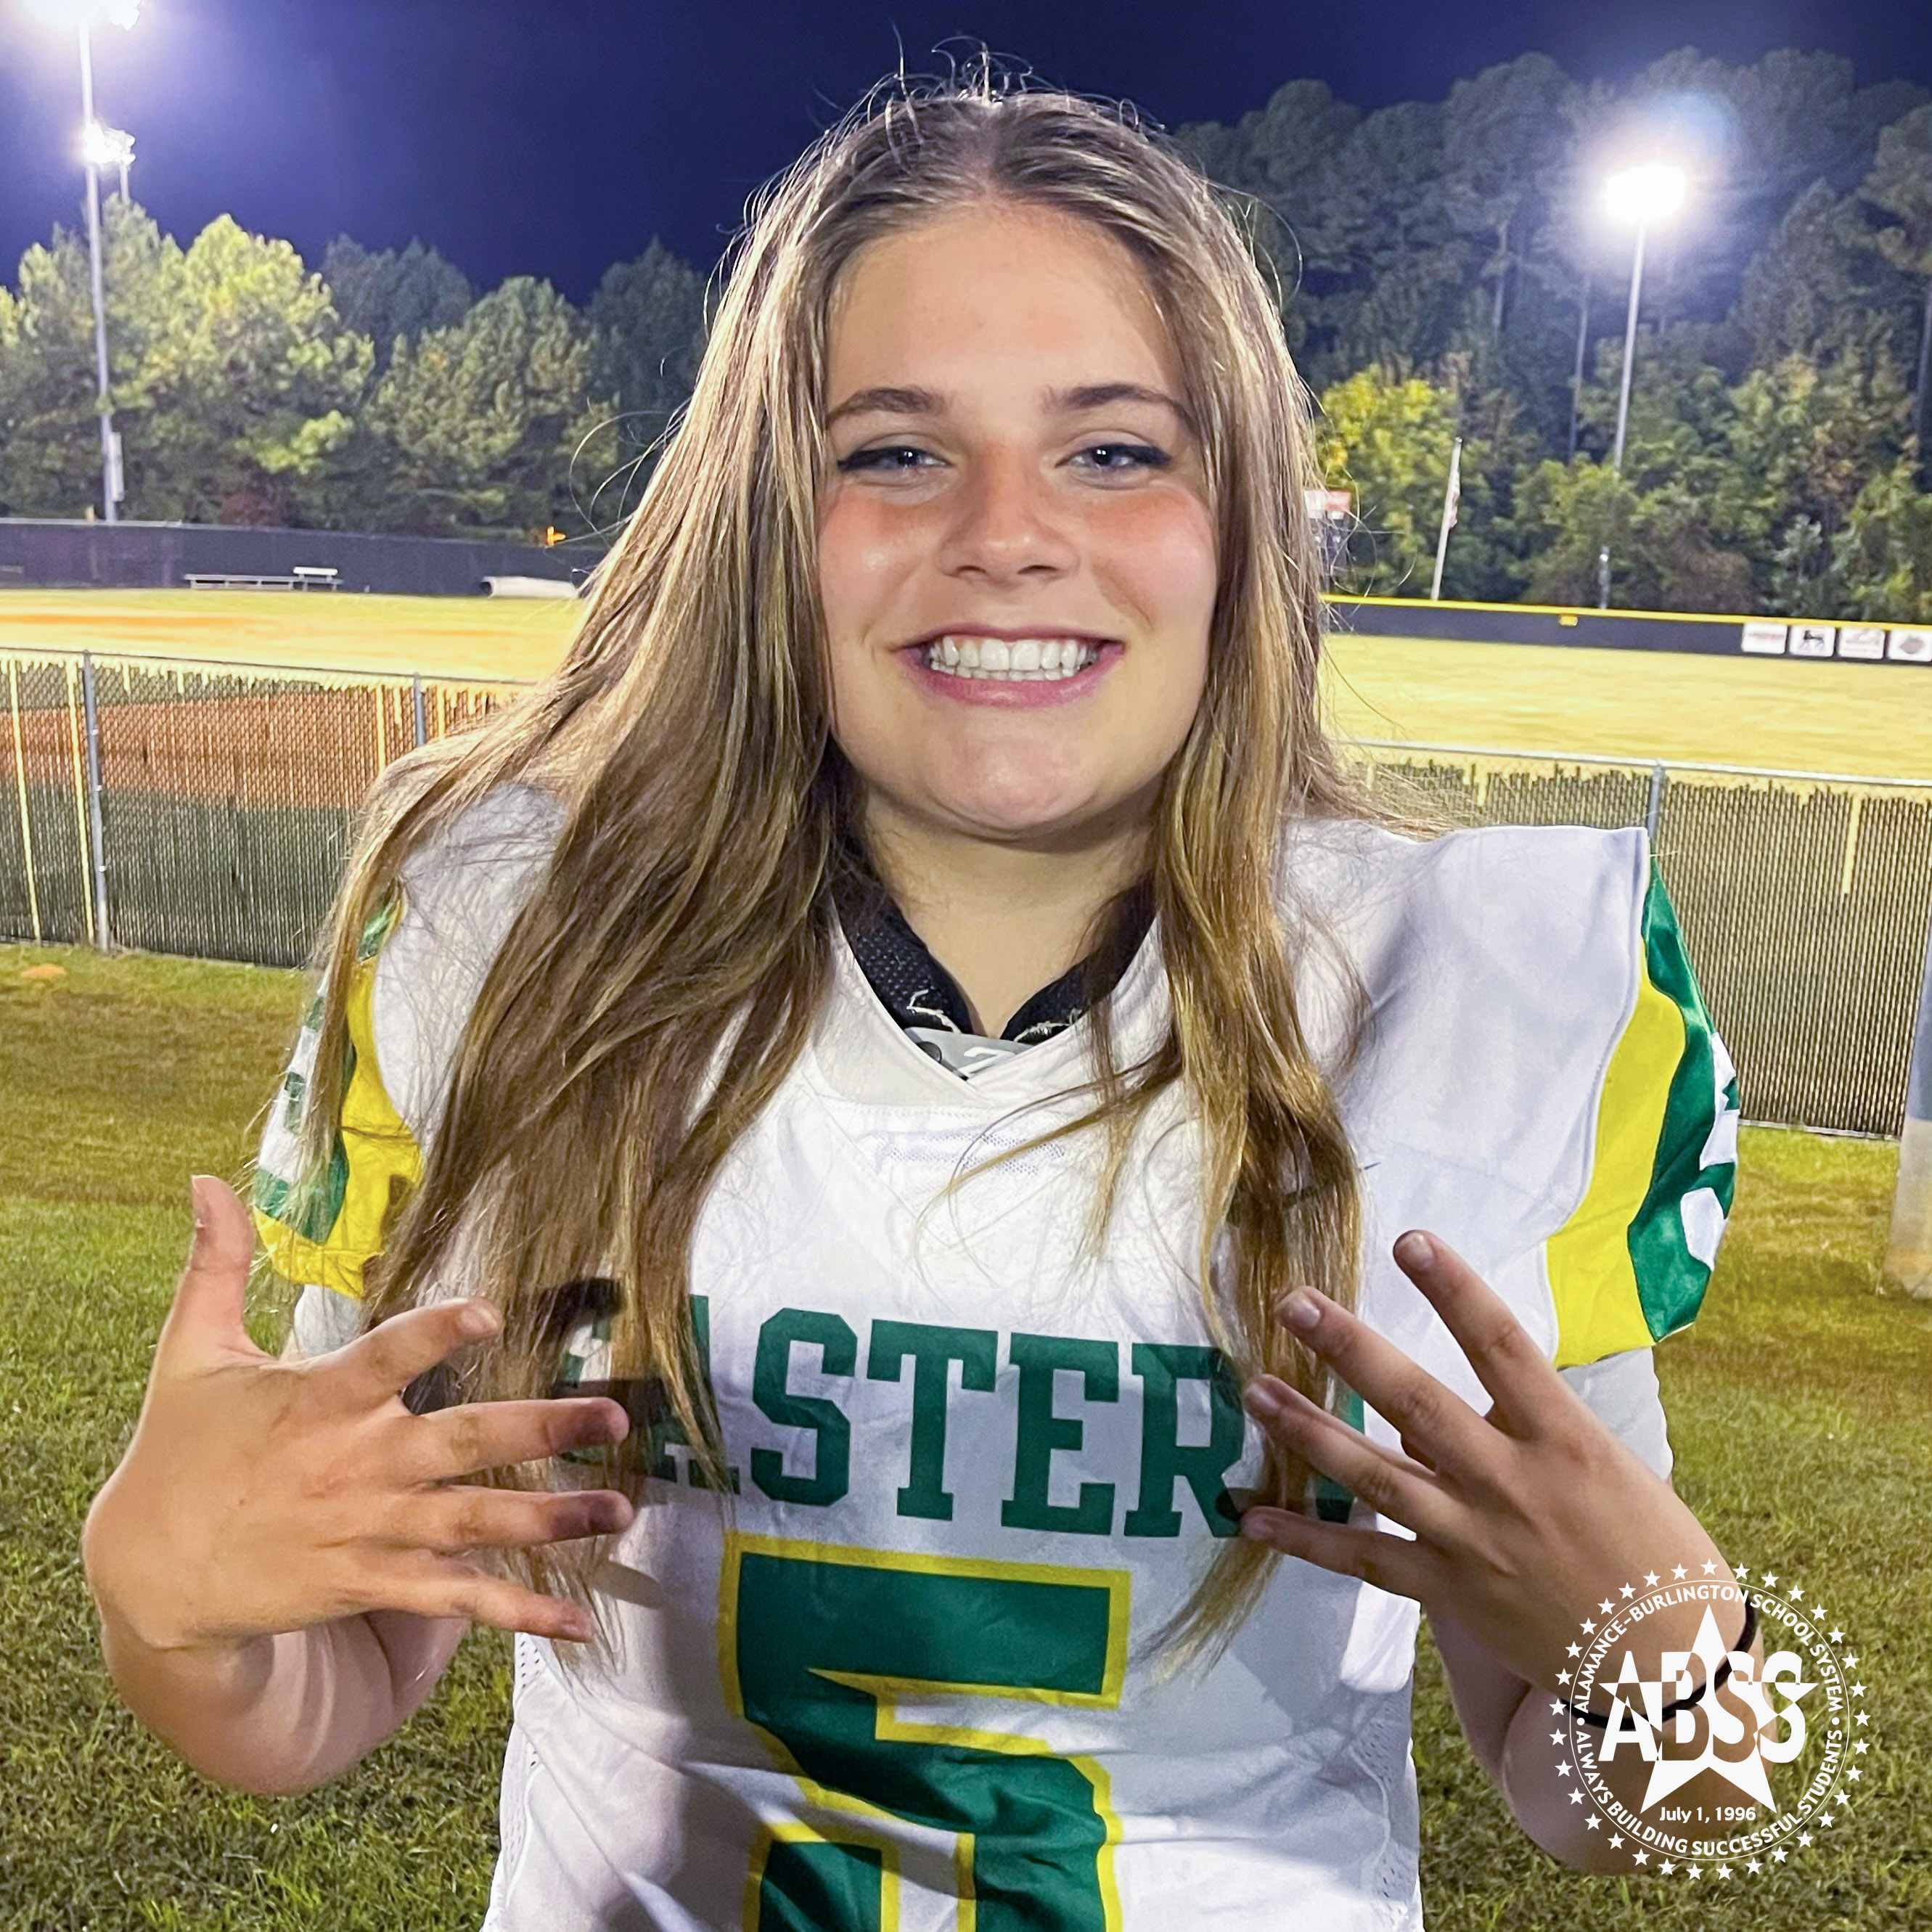 Photograph of Eastern Alamance High School kicker Karsyn Johnson wearing her jersey and smiling at the camera